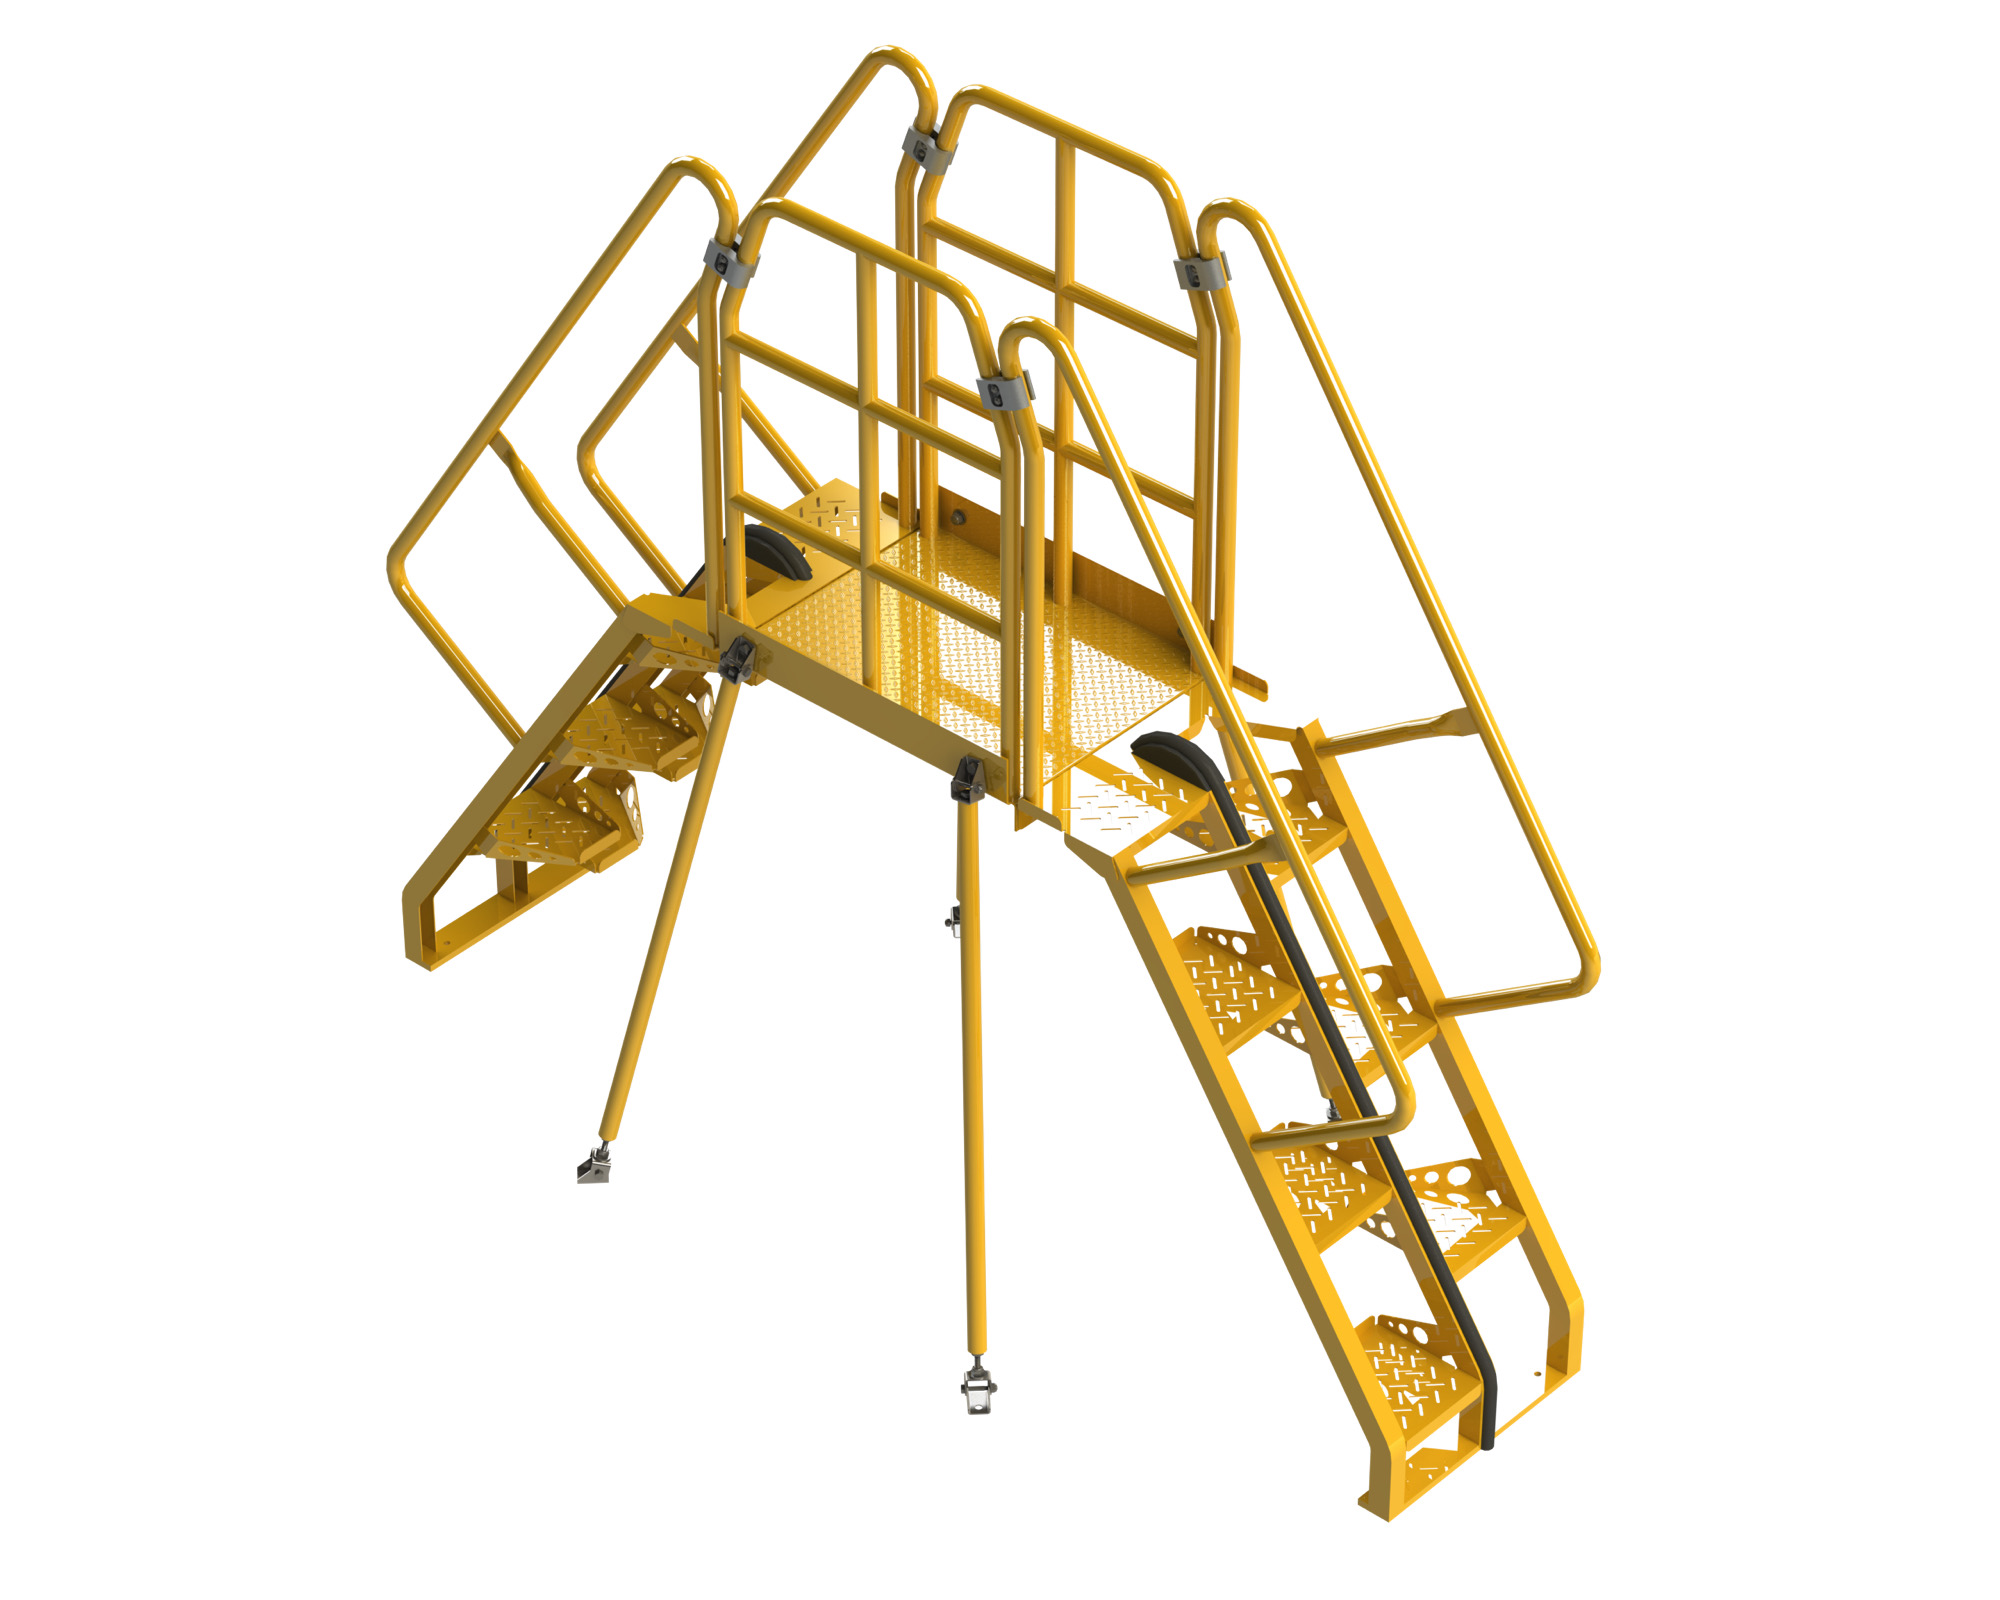 Crossover Stairs, Alternating Tread, with Sway Bracing, Safety Yellow, Perforated, Alternating Tread Stair 56